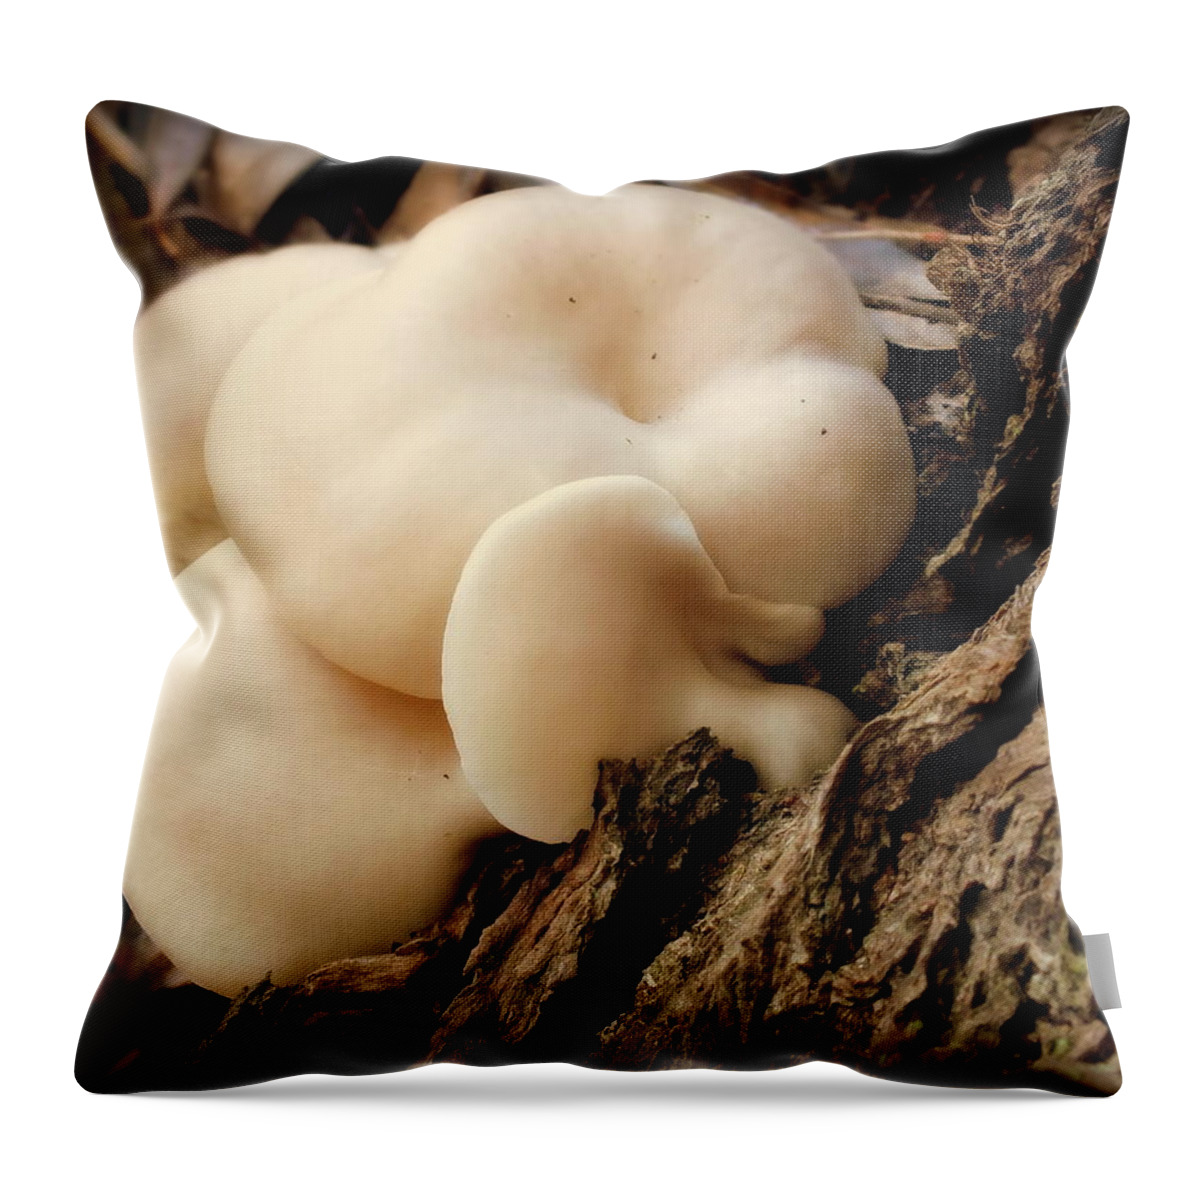 Mushrooms Throw Pillow featuring the photograph White Cloud Mushrooms by Karen Wiles